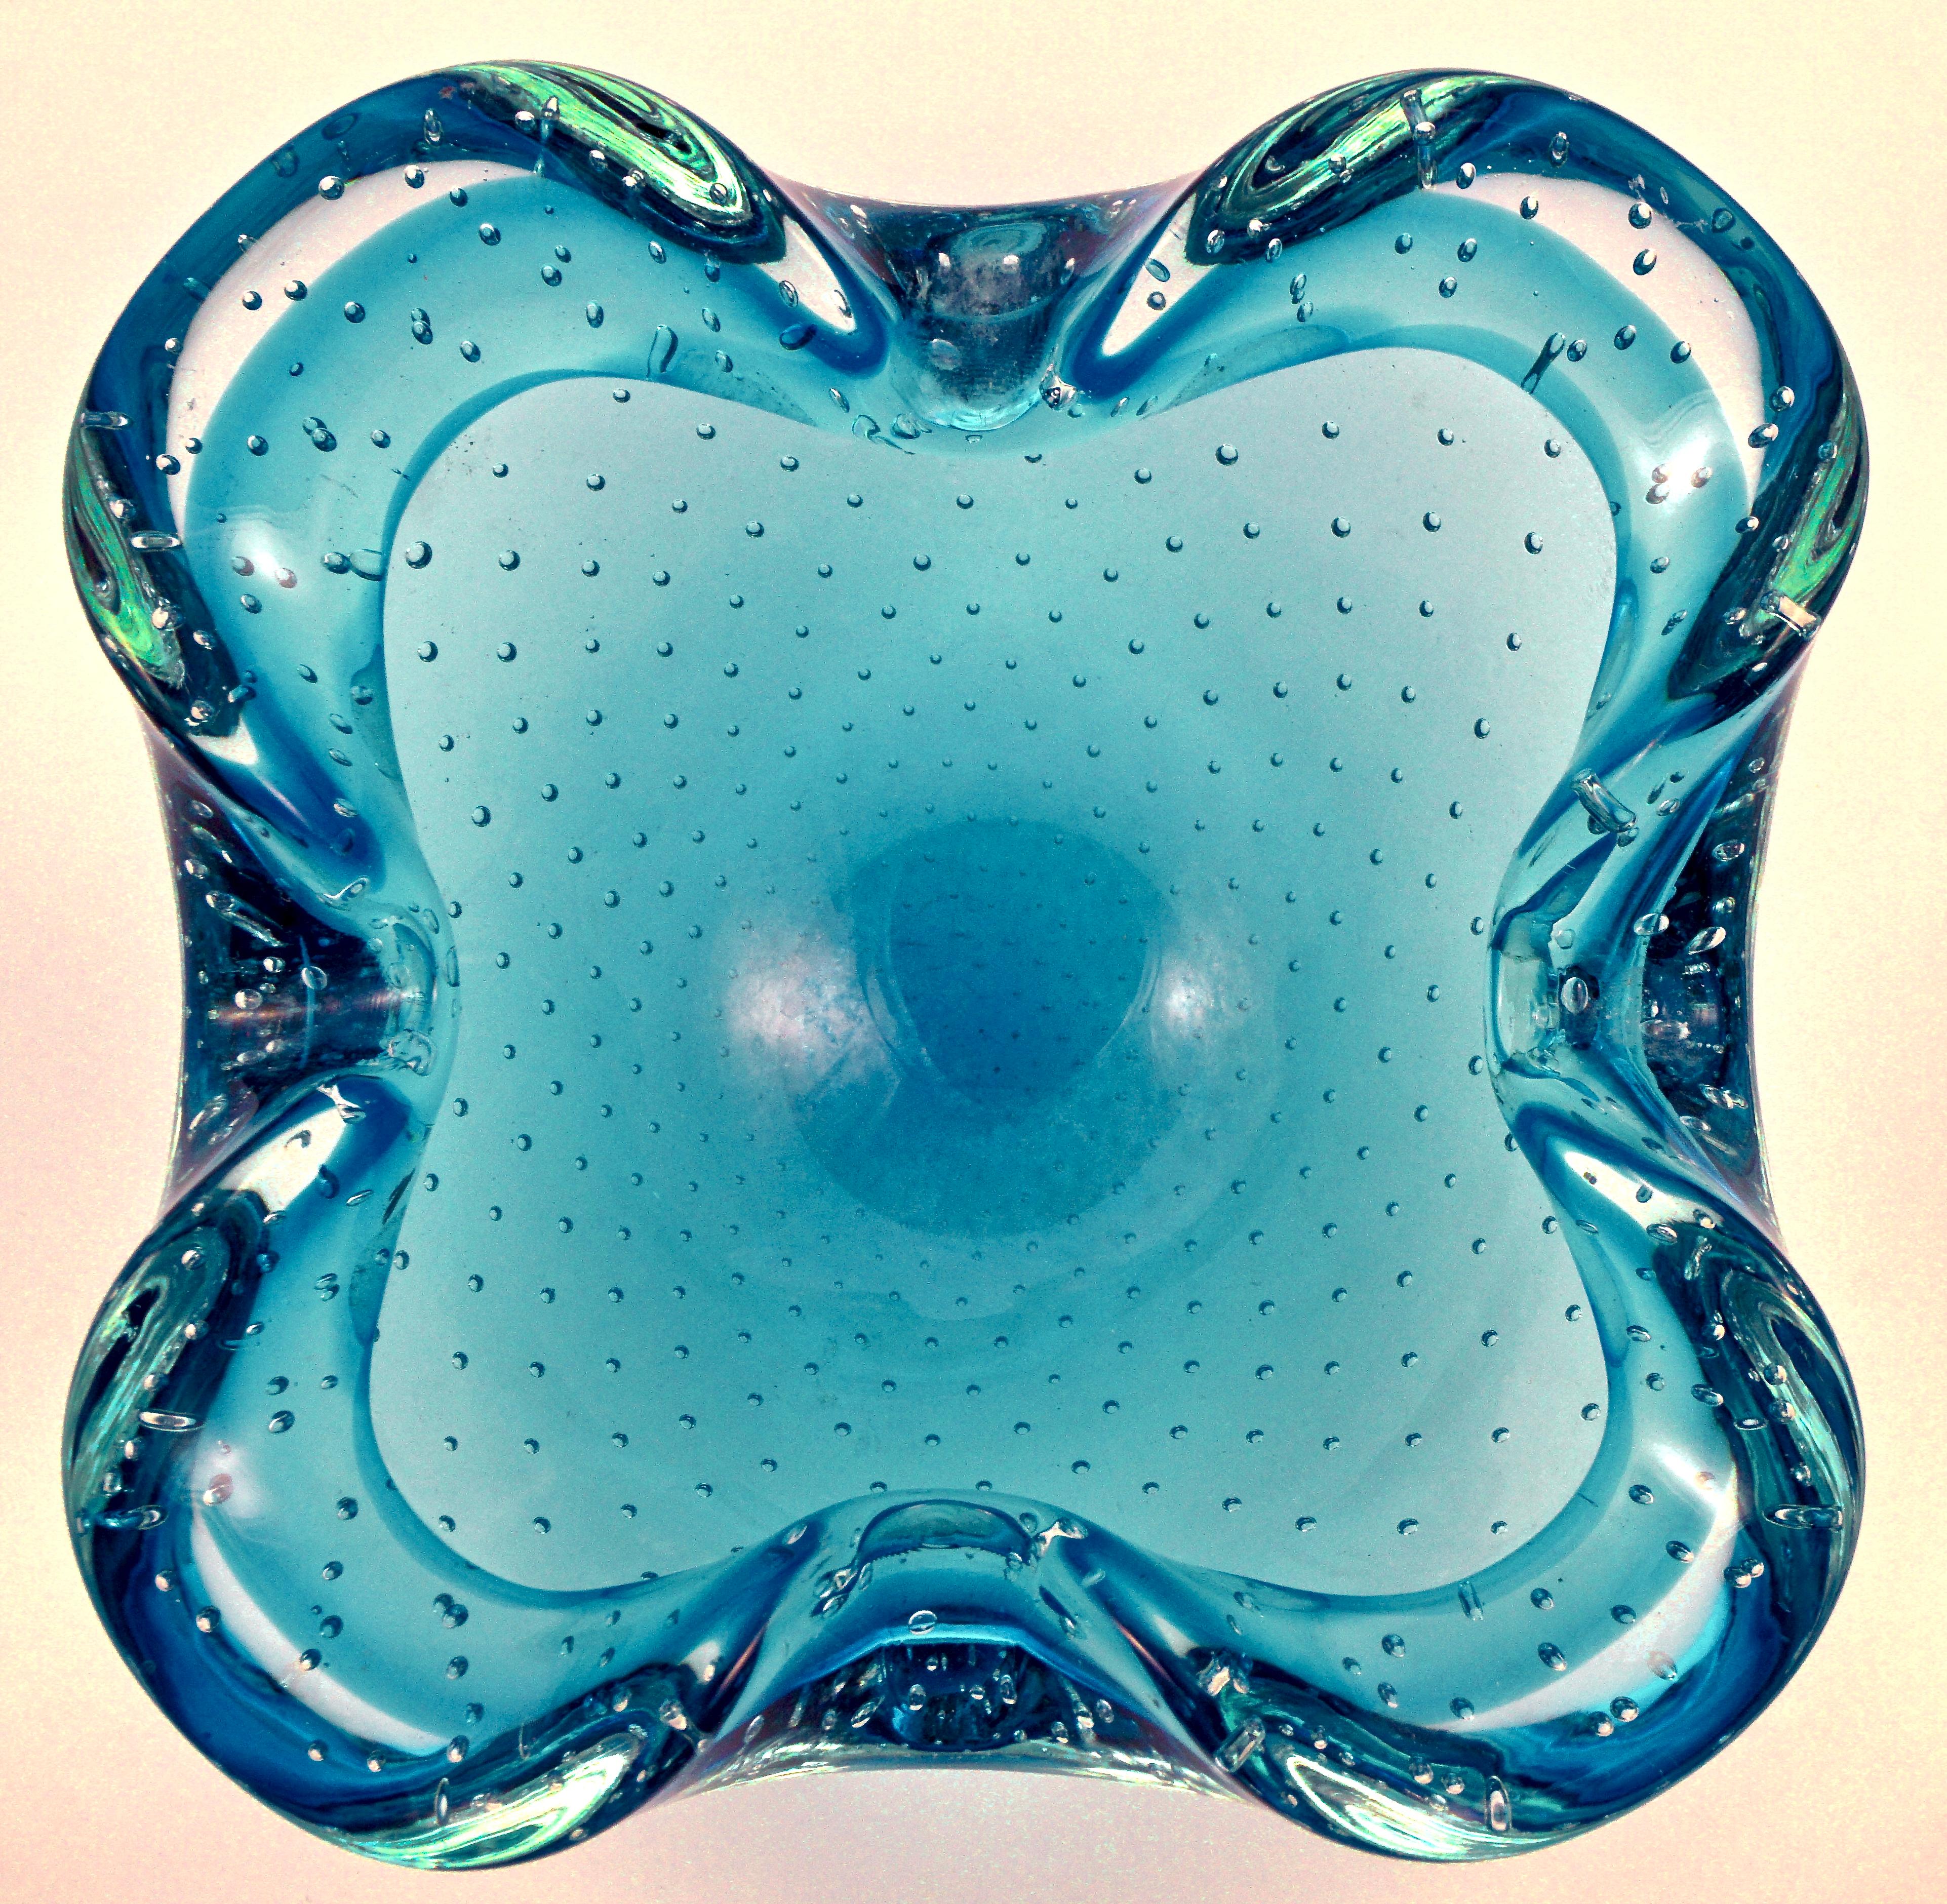 Hand made art glass ashtray in an electric blue and clear colourway, featuring controlled bubbles. The ashtray has a lovely curved organic shape. It is in very good condition, with some scratching, and measures width 17.2cm / 6.77 inches.

This is a